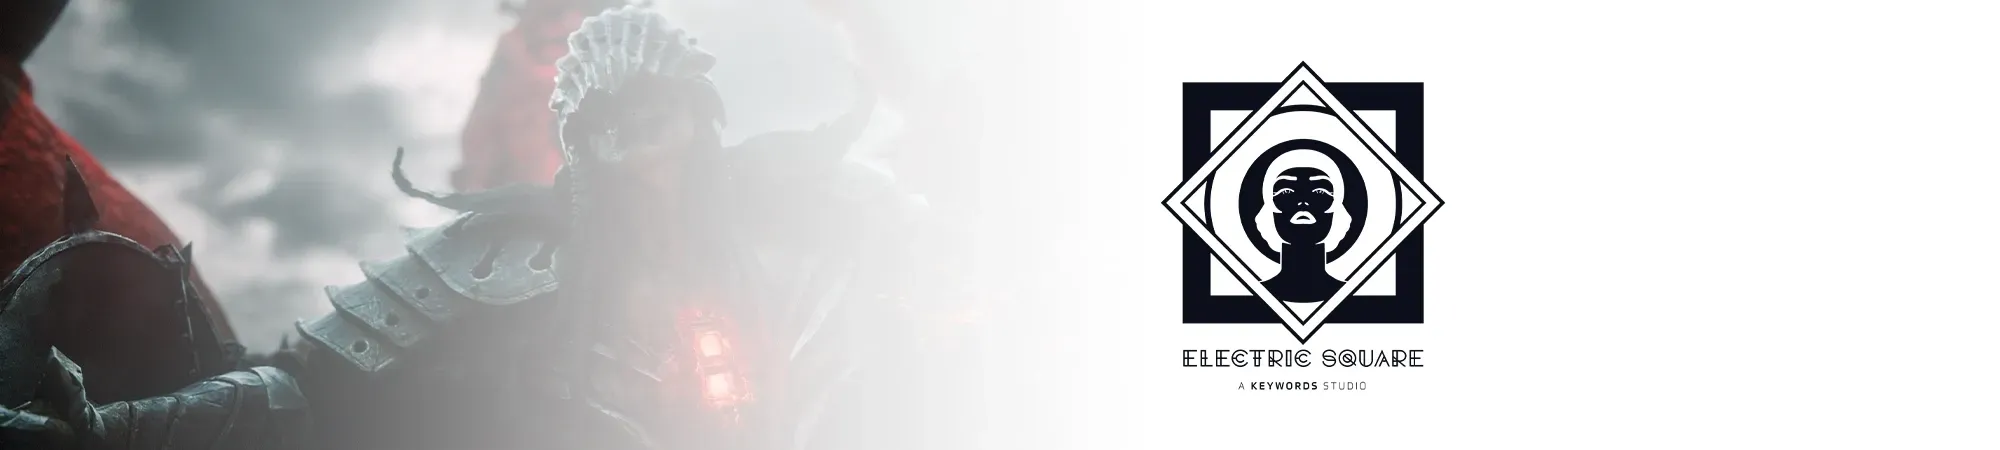 Electric Square Banner